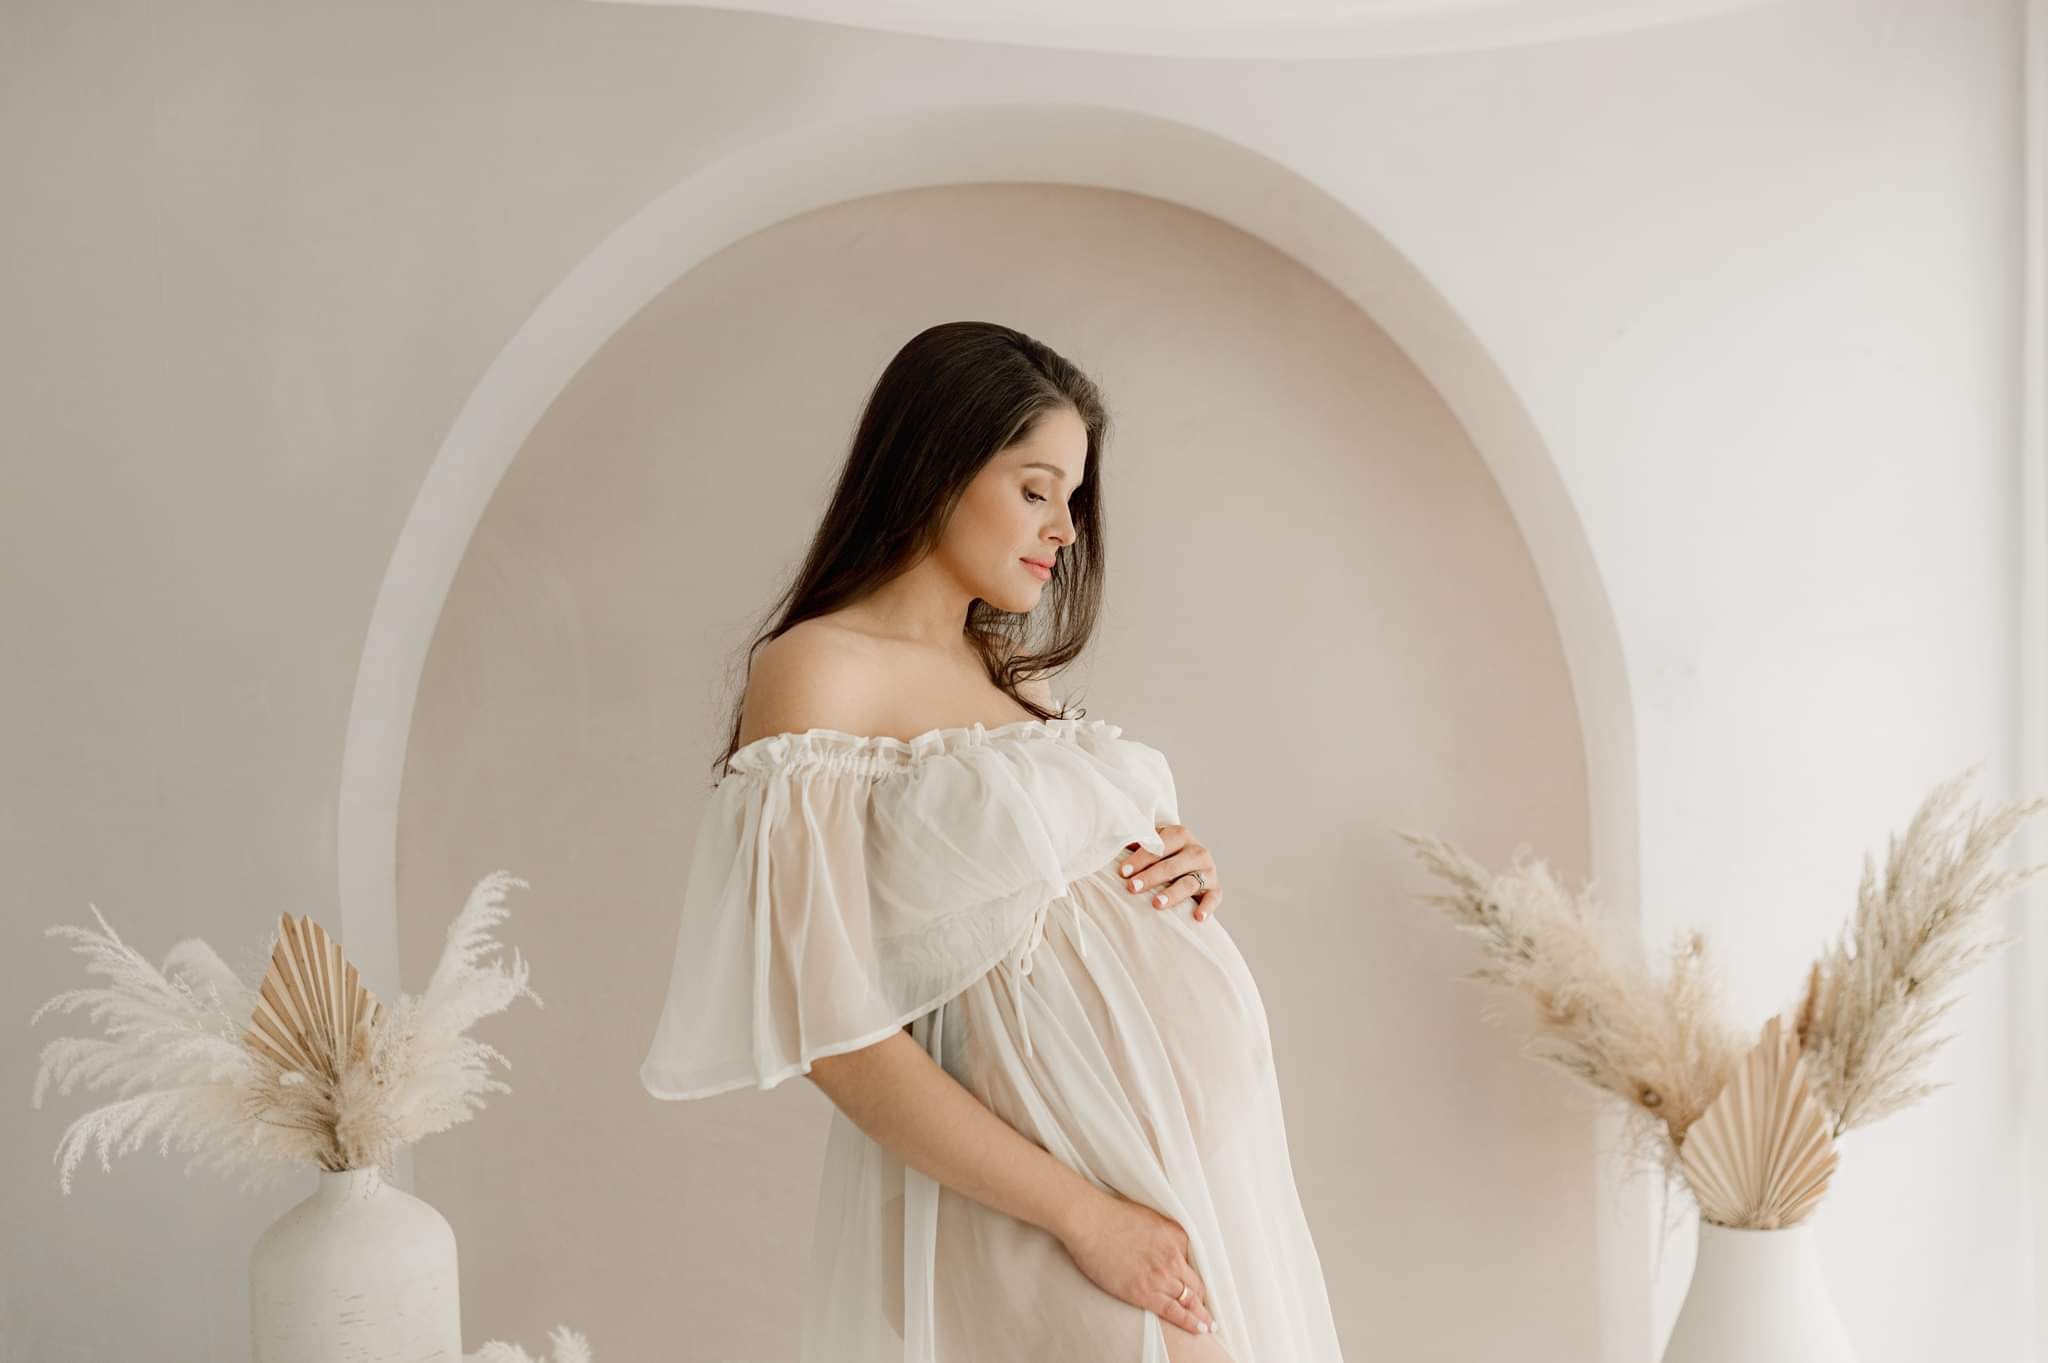 Pregnant woman standing in front of boho arch  backdrop